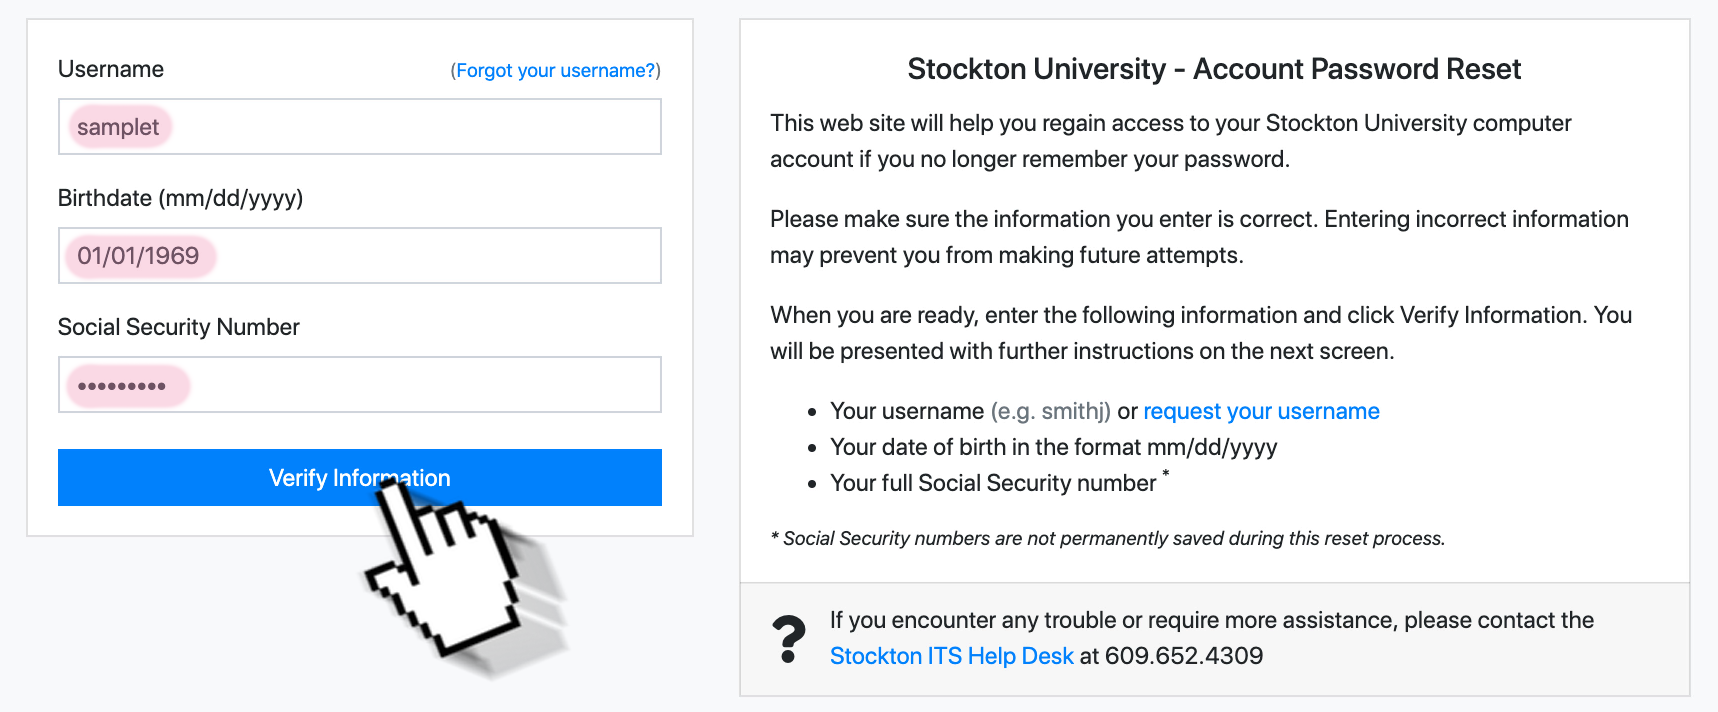 A screenshot of the GoStockton Portal password reset form. It indicates the three fields to fill in for identity verification - username, date of birth, and social security number.